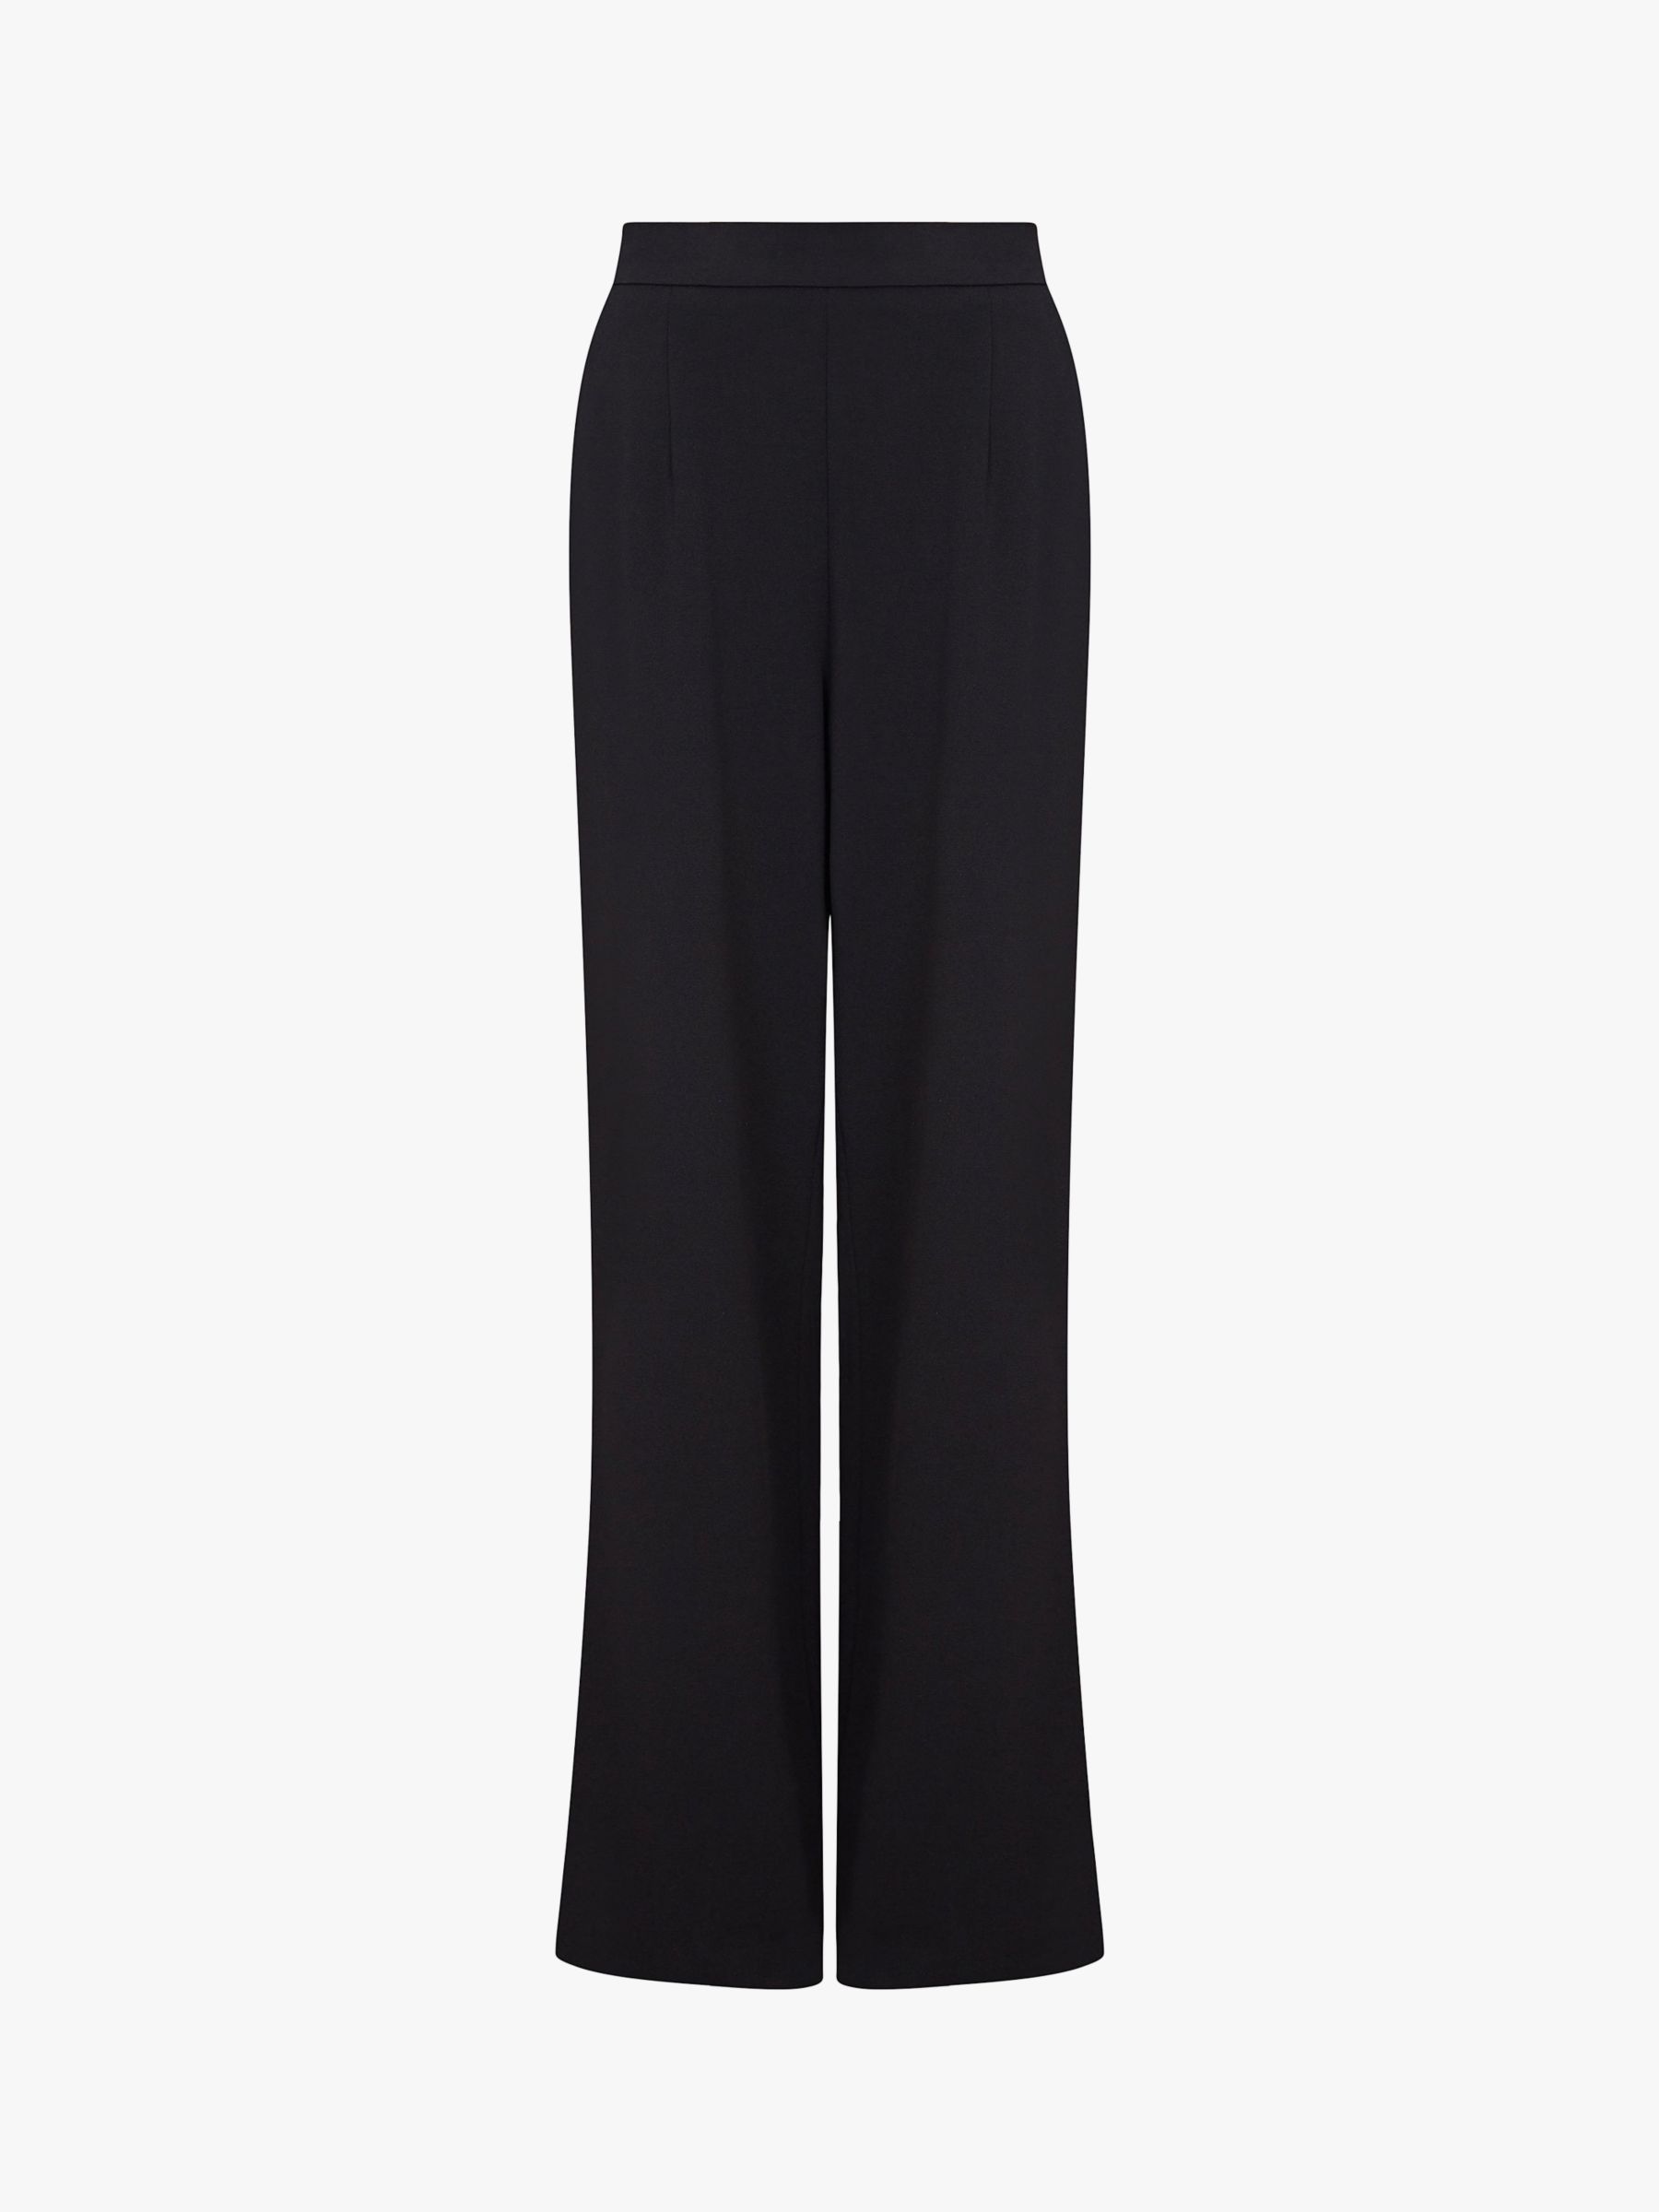 Adrianna Papell Crepe Tuxedo Trousers, Black at John Lewis & Partners